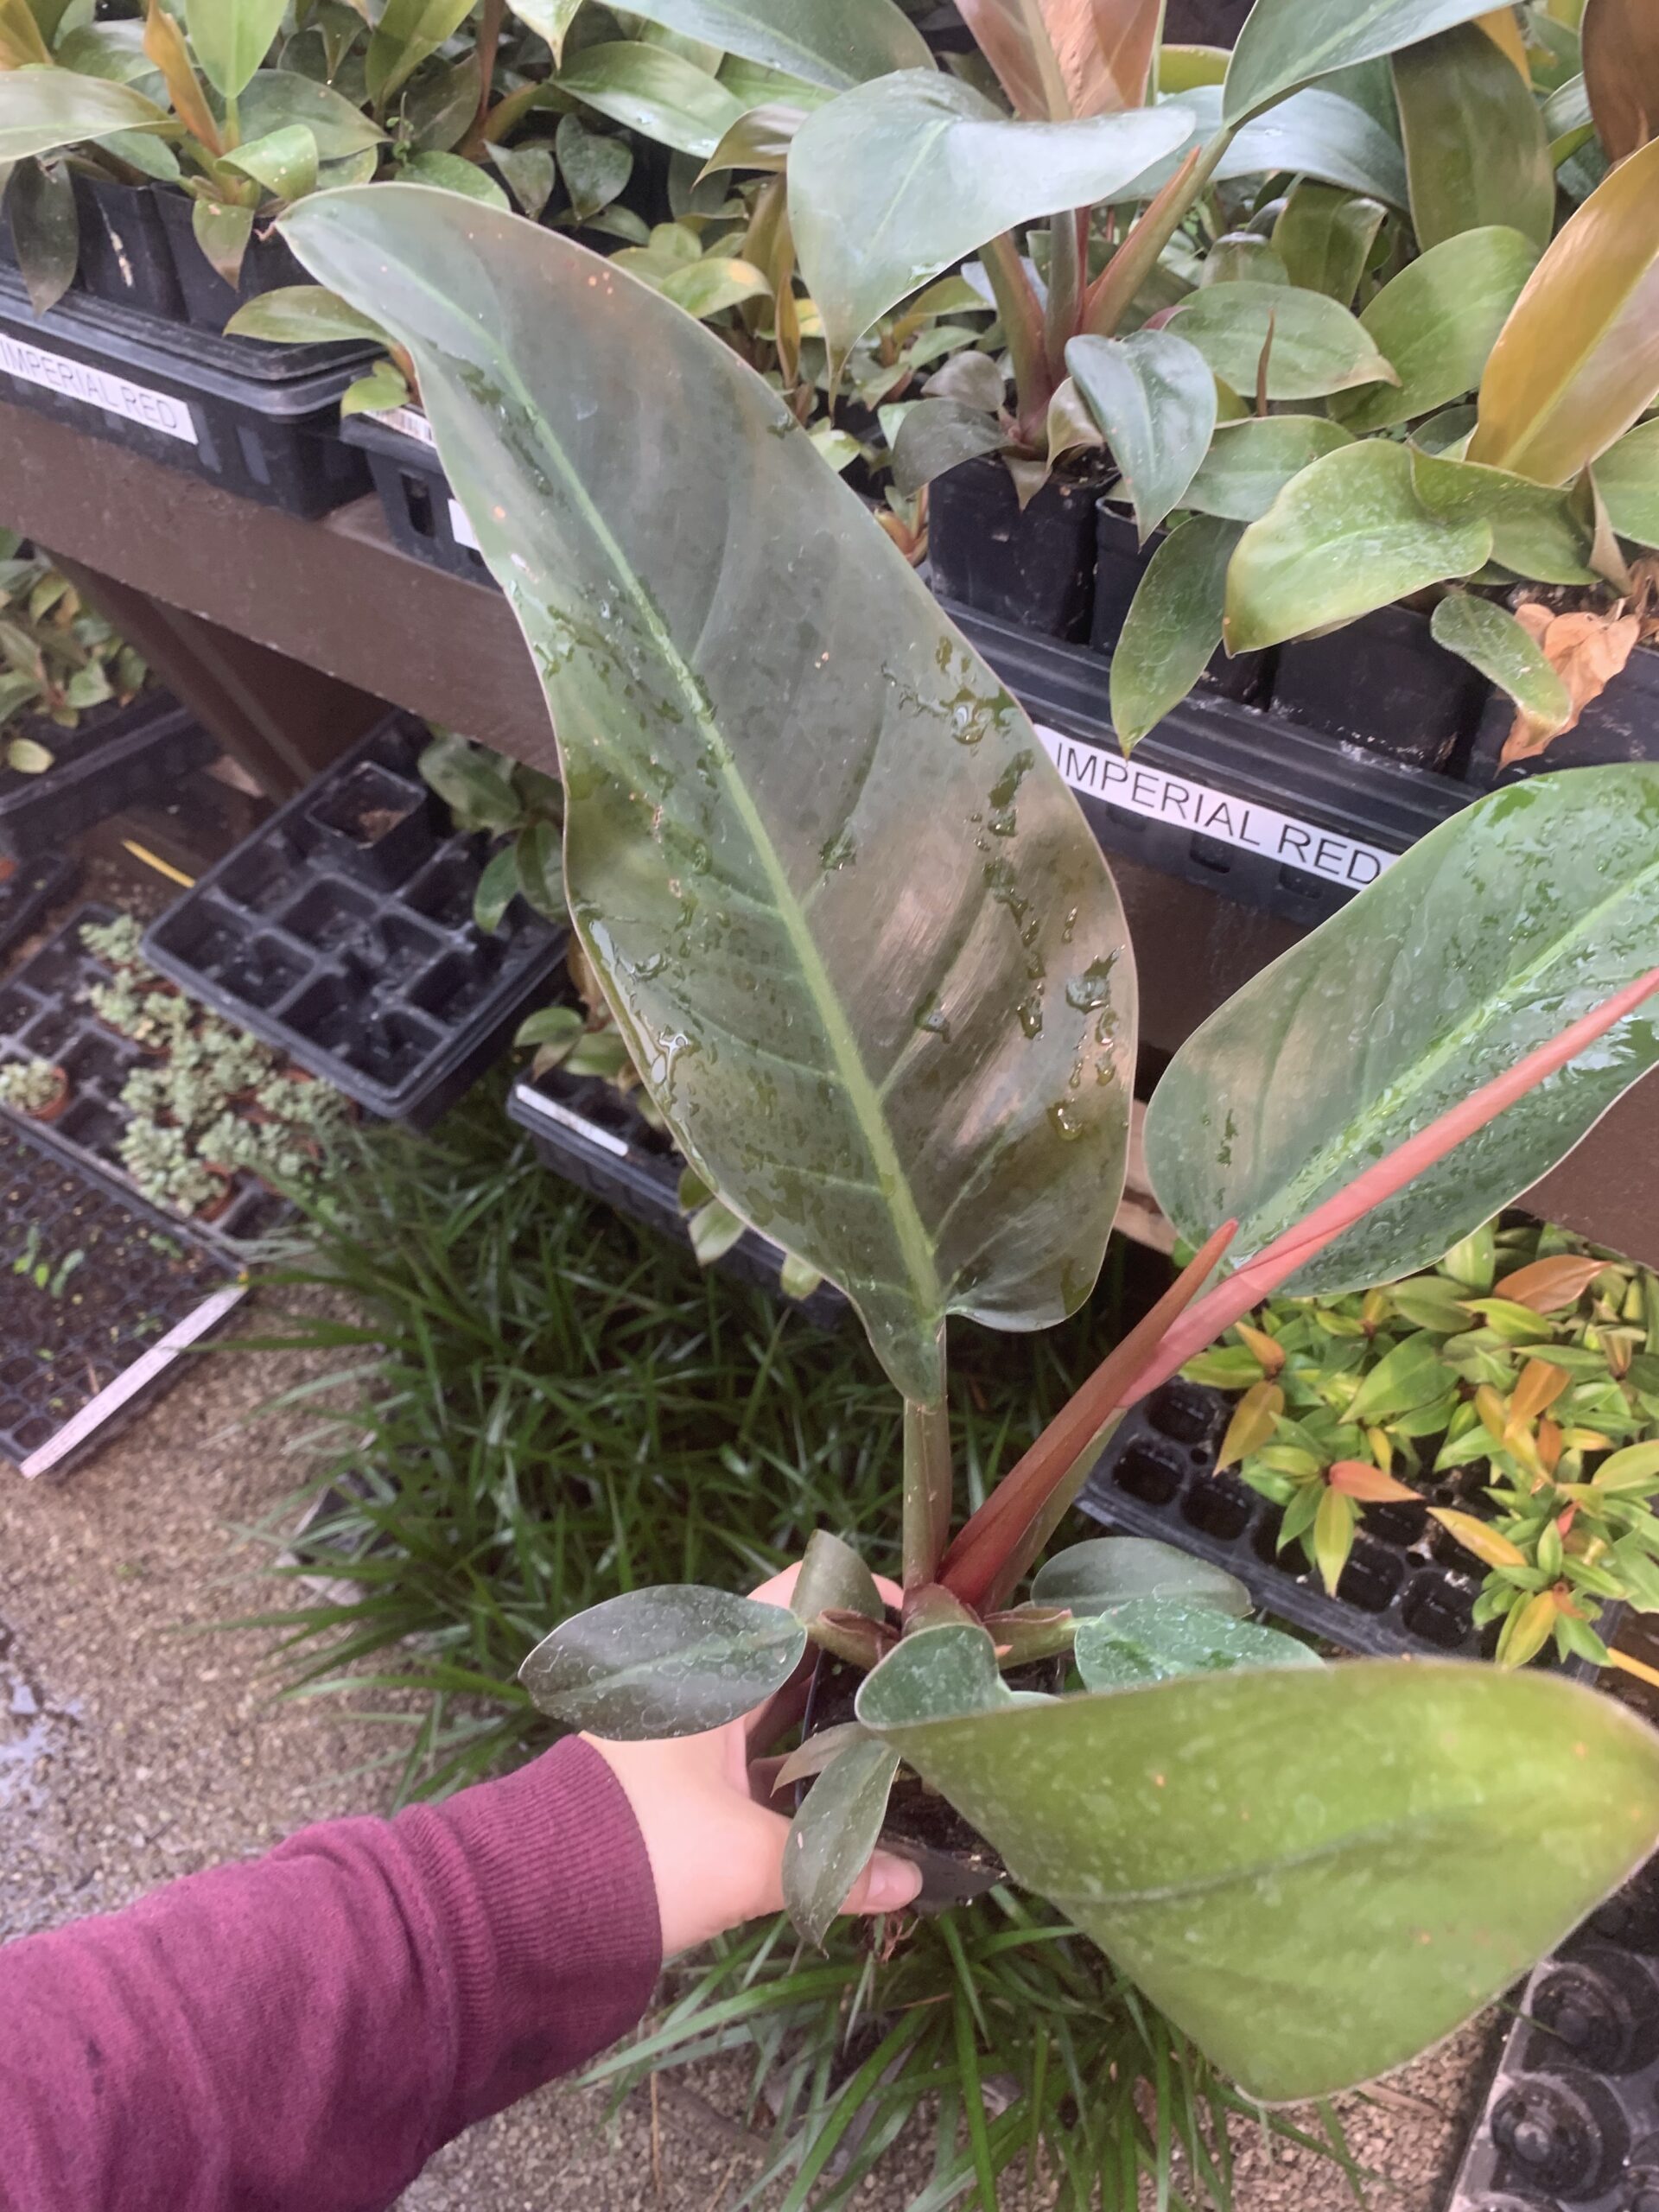 The Journey of Imperial Red Philodendron: From Seedling to Mature Growth